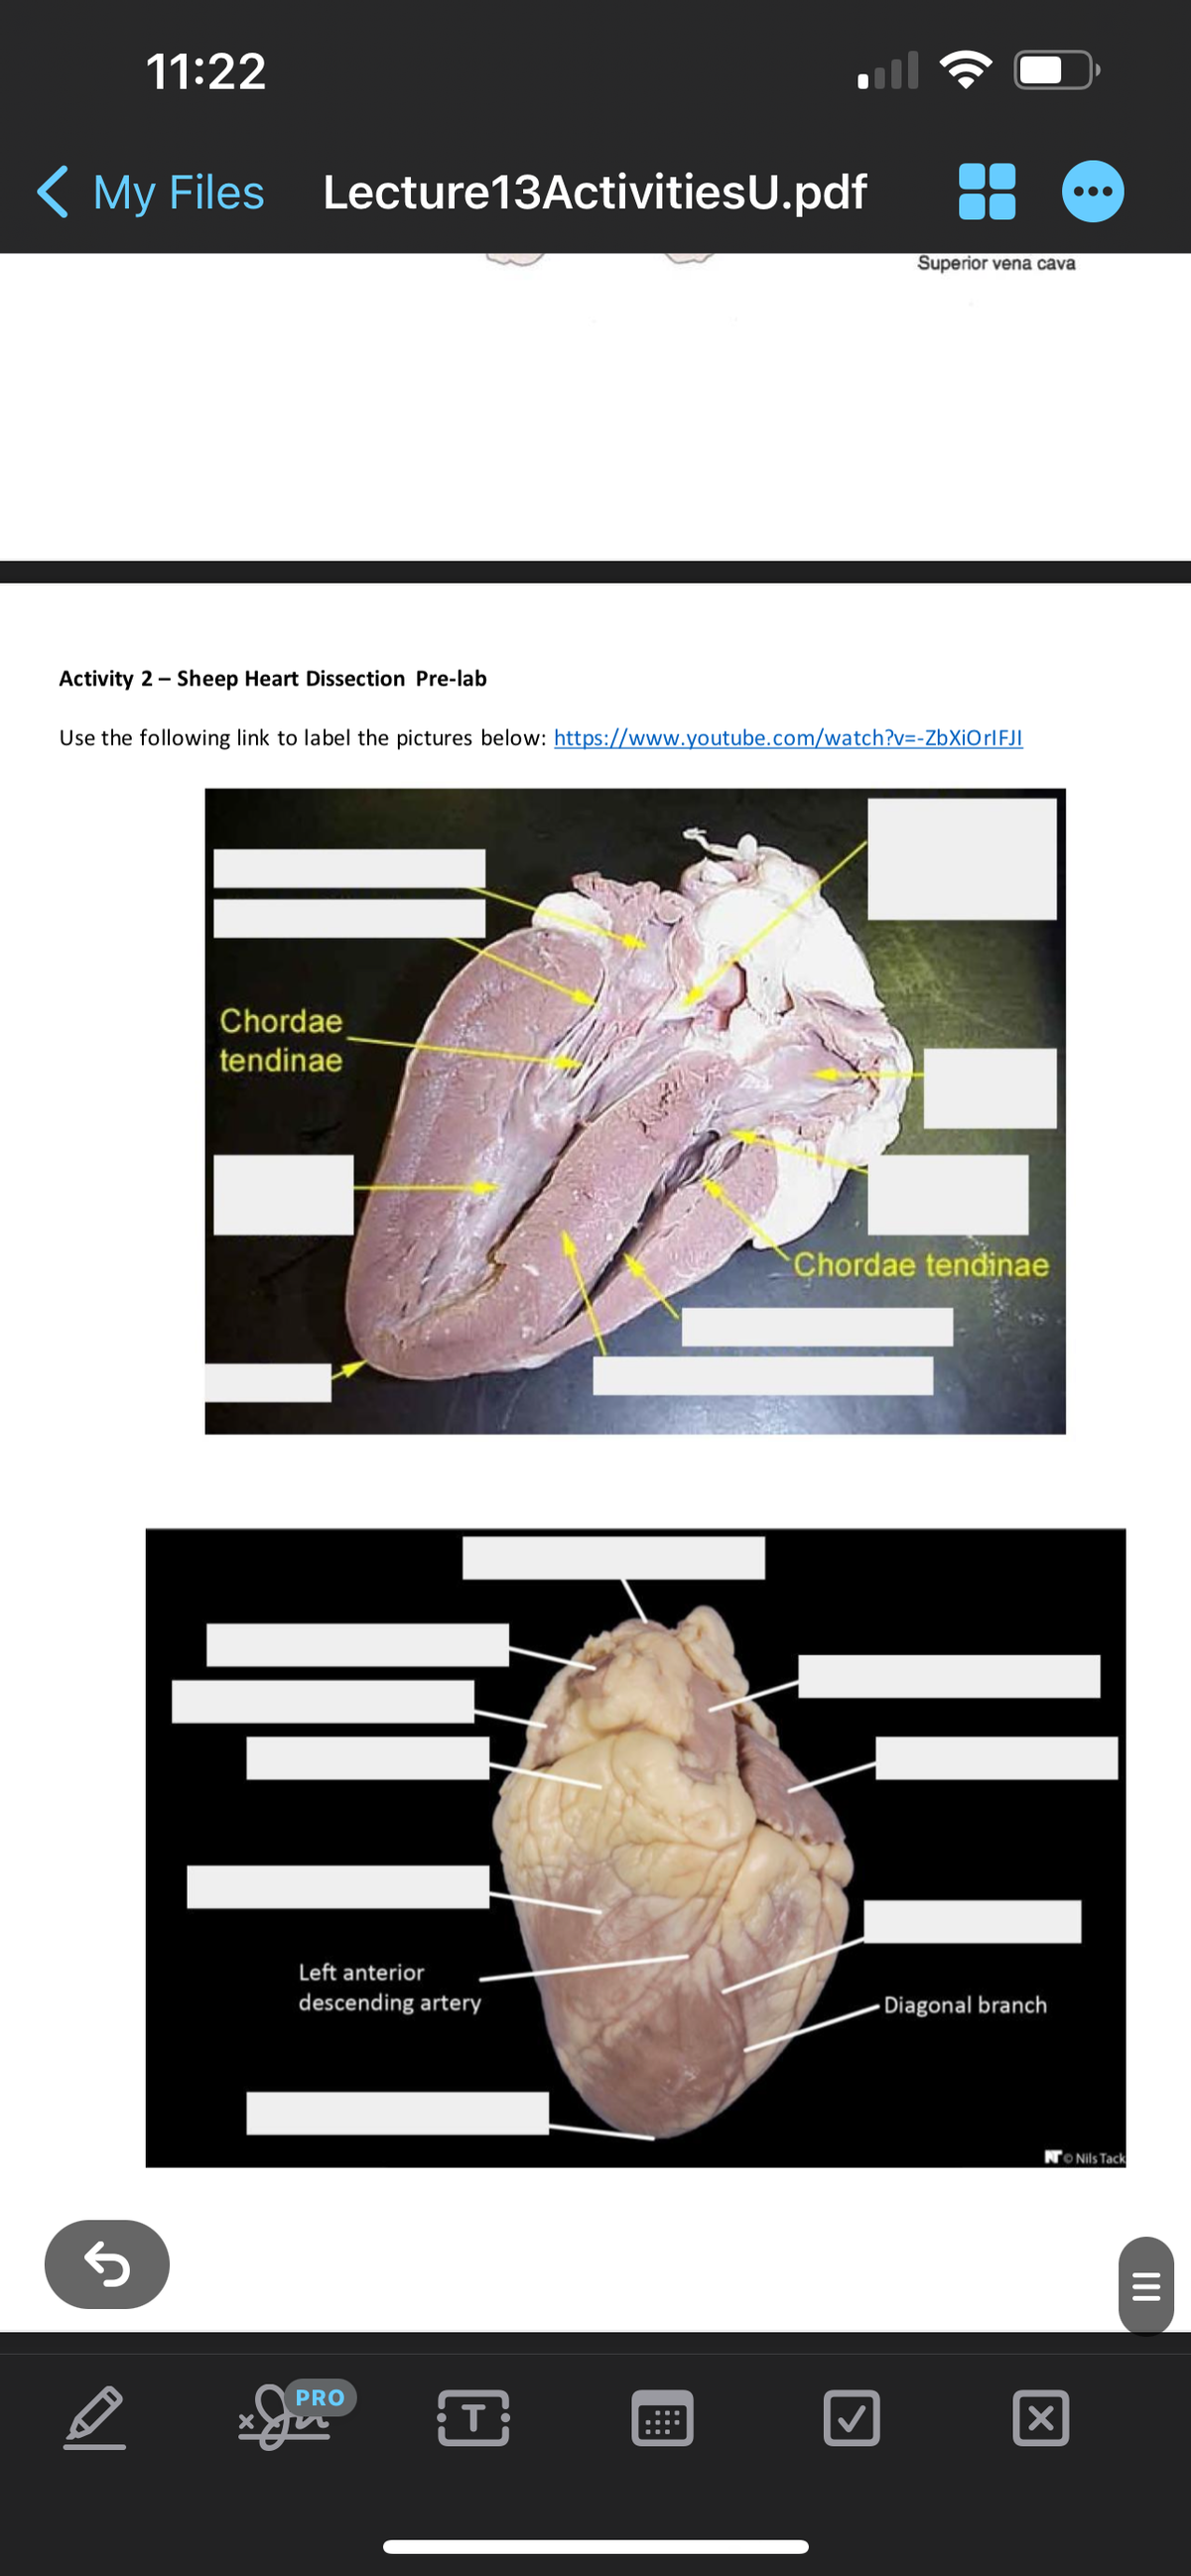 <
11:22
My Files Lecture13Activities U.pdf
Superior vena cava
Activity 2 Sheep Heart Dissection Pre-lab
Use the following link to label the pictures below: https://www.youtube.com/watch?v=-ZbXiOrlFJI
←
Chordae
tendinae
Chordae tendinae
Left anterior
descending artery
Diagonal branch
PRO
☑
☑
Nils Tack
|||